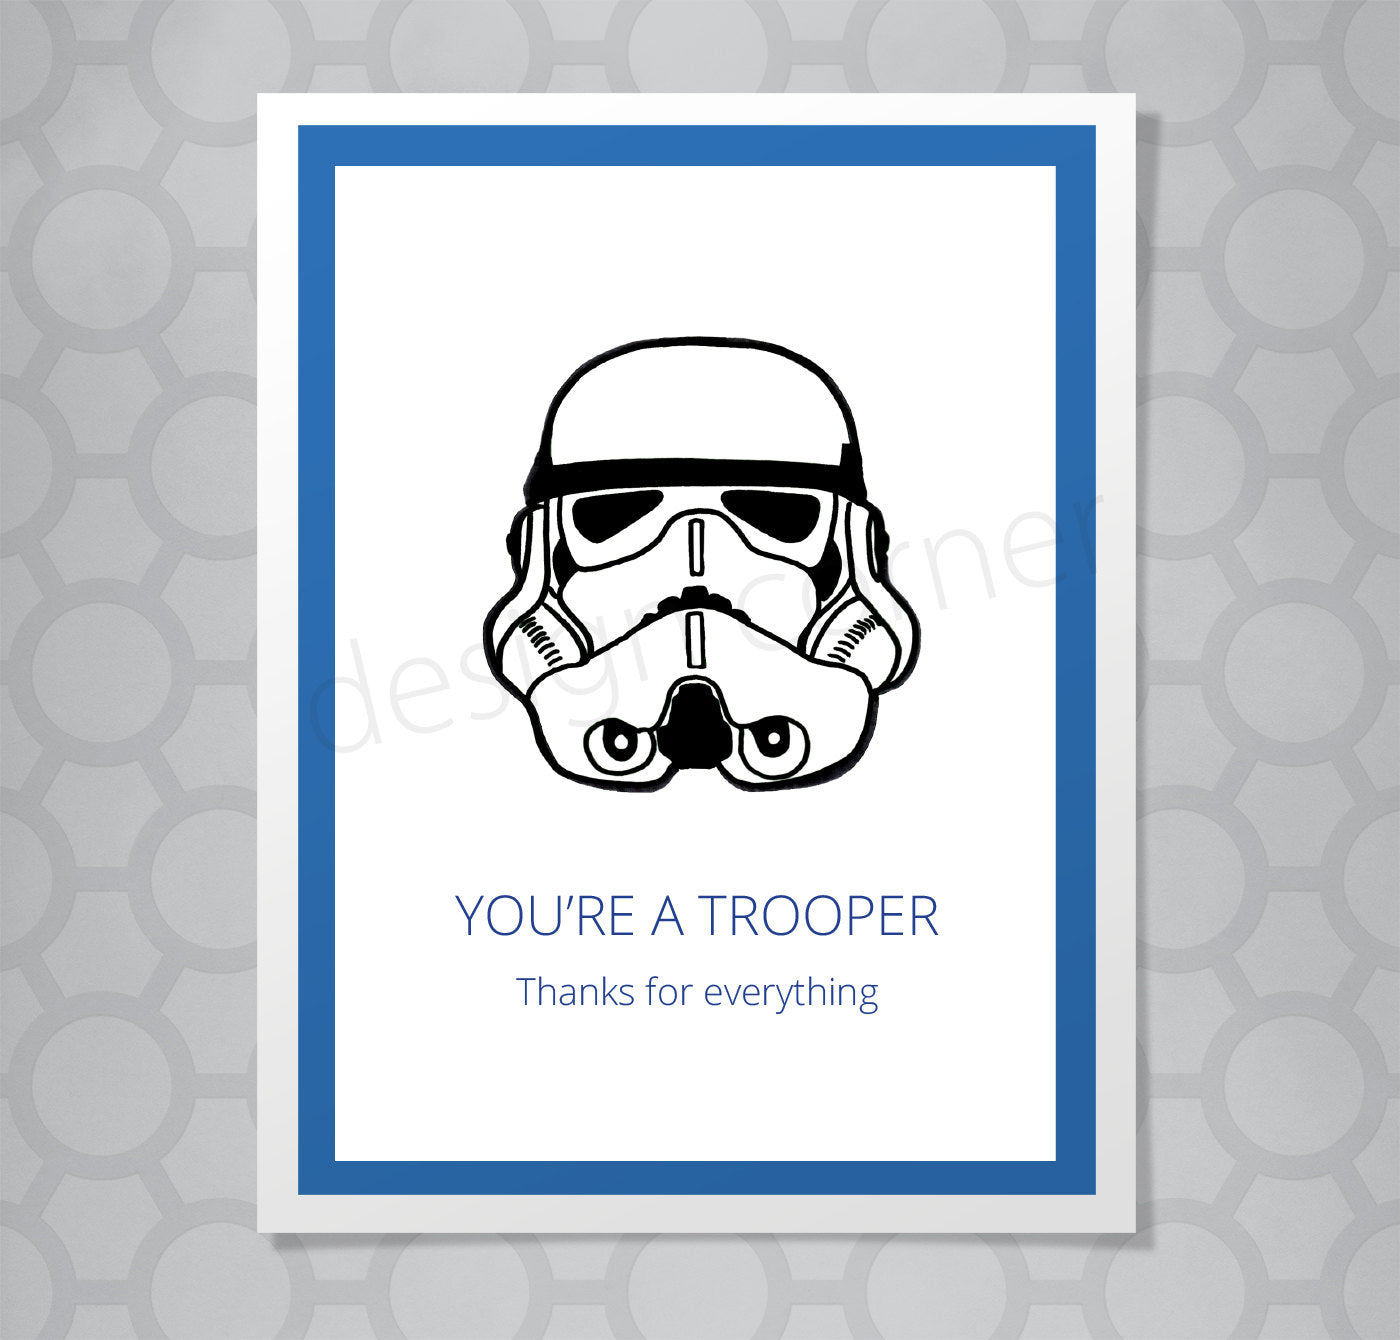 Star Wars Storm Trooper Thank You Card